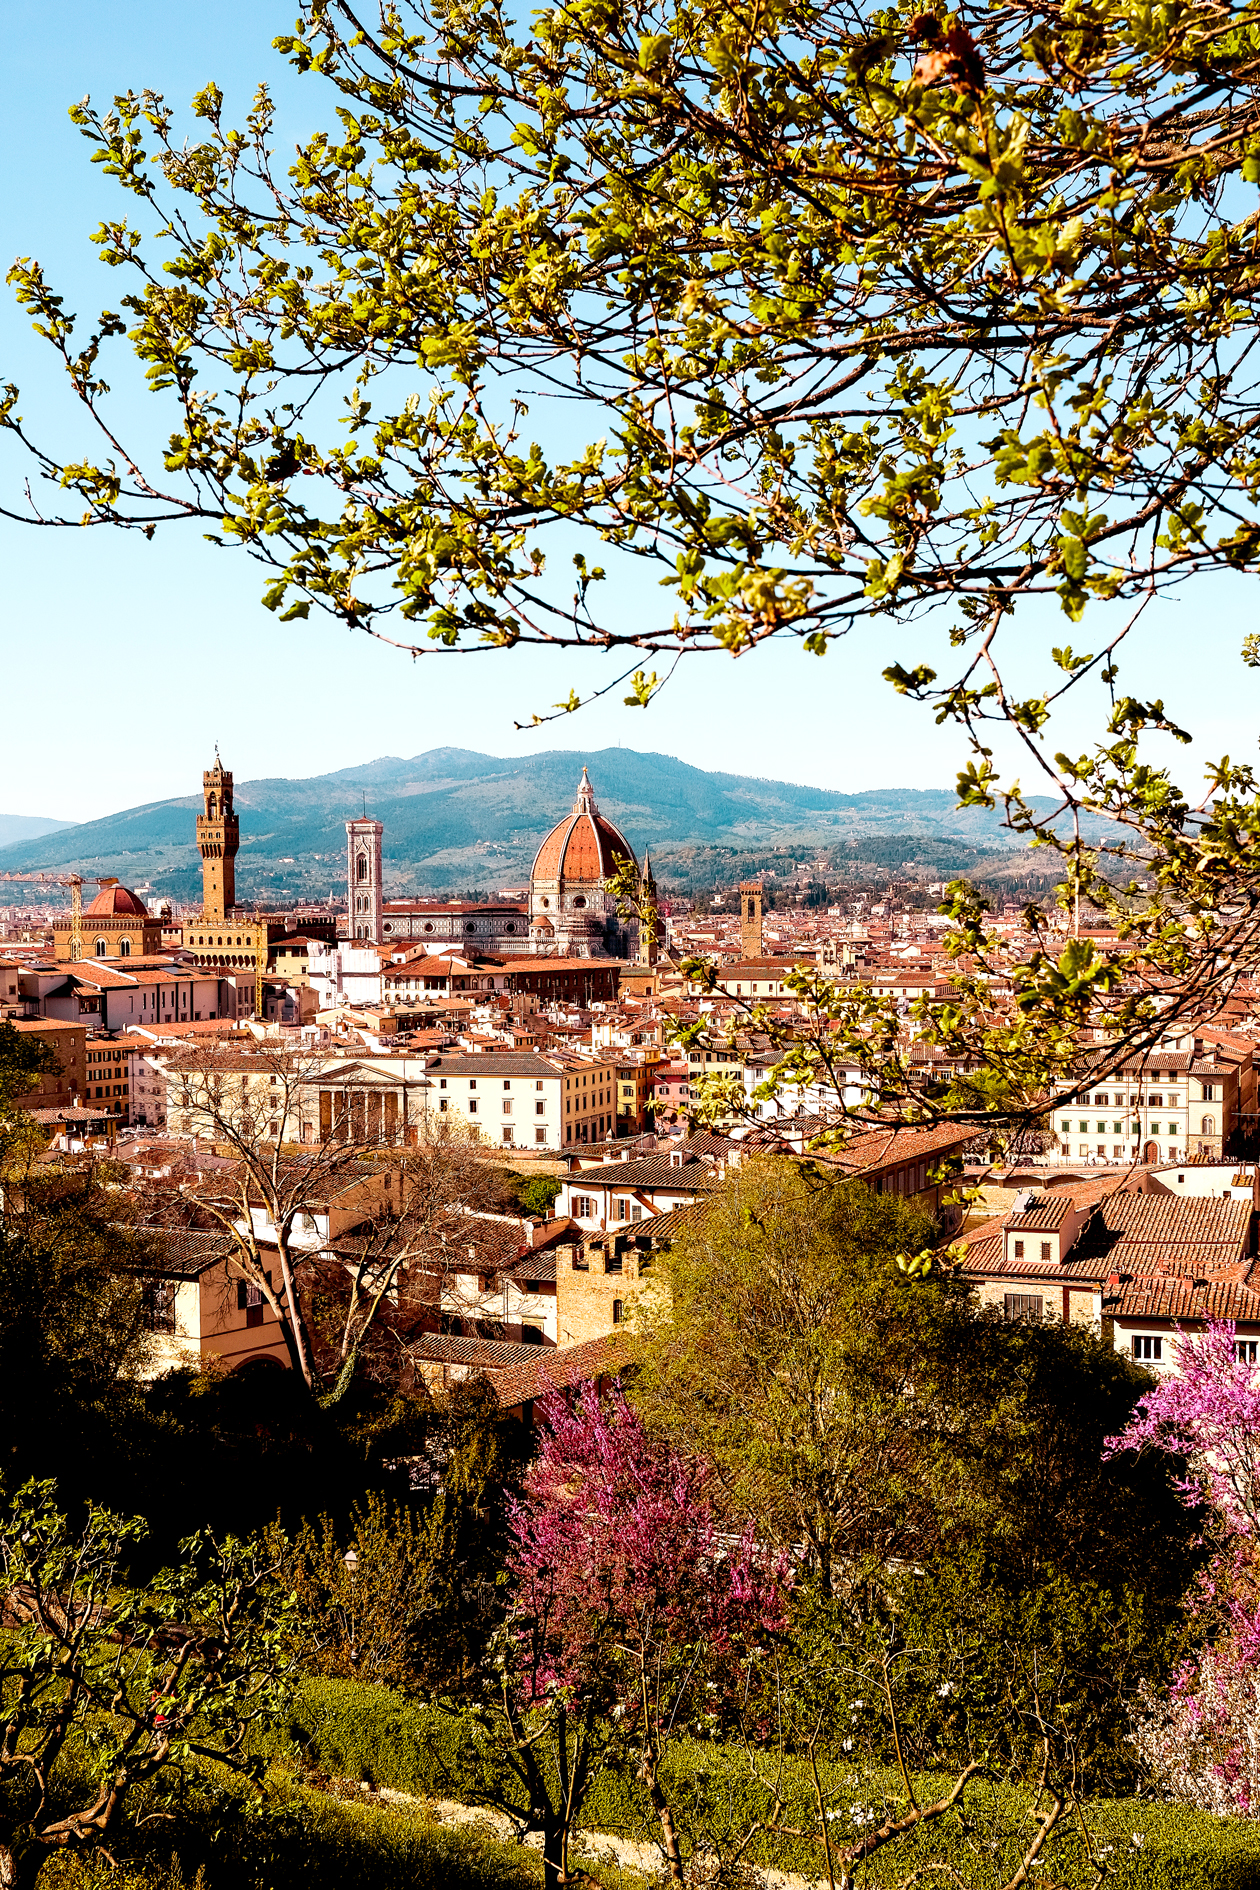 We went to Italy for our honeymoon and here's how we spent 5 days in Florence. If you want a travel guide to Florence, Italy (including where to shop, what to eat, and what to do) this is it. Photo taken at the Bardini Gardens